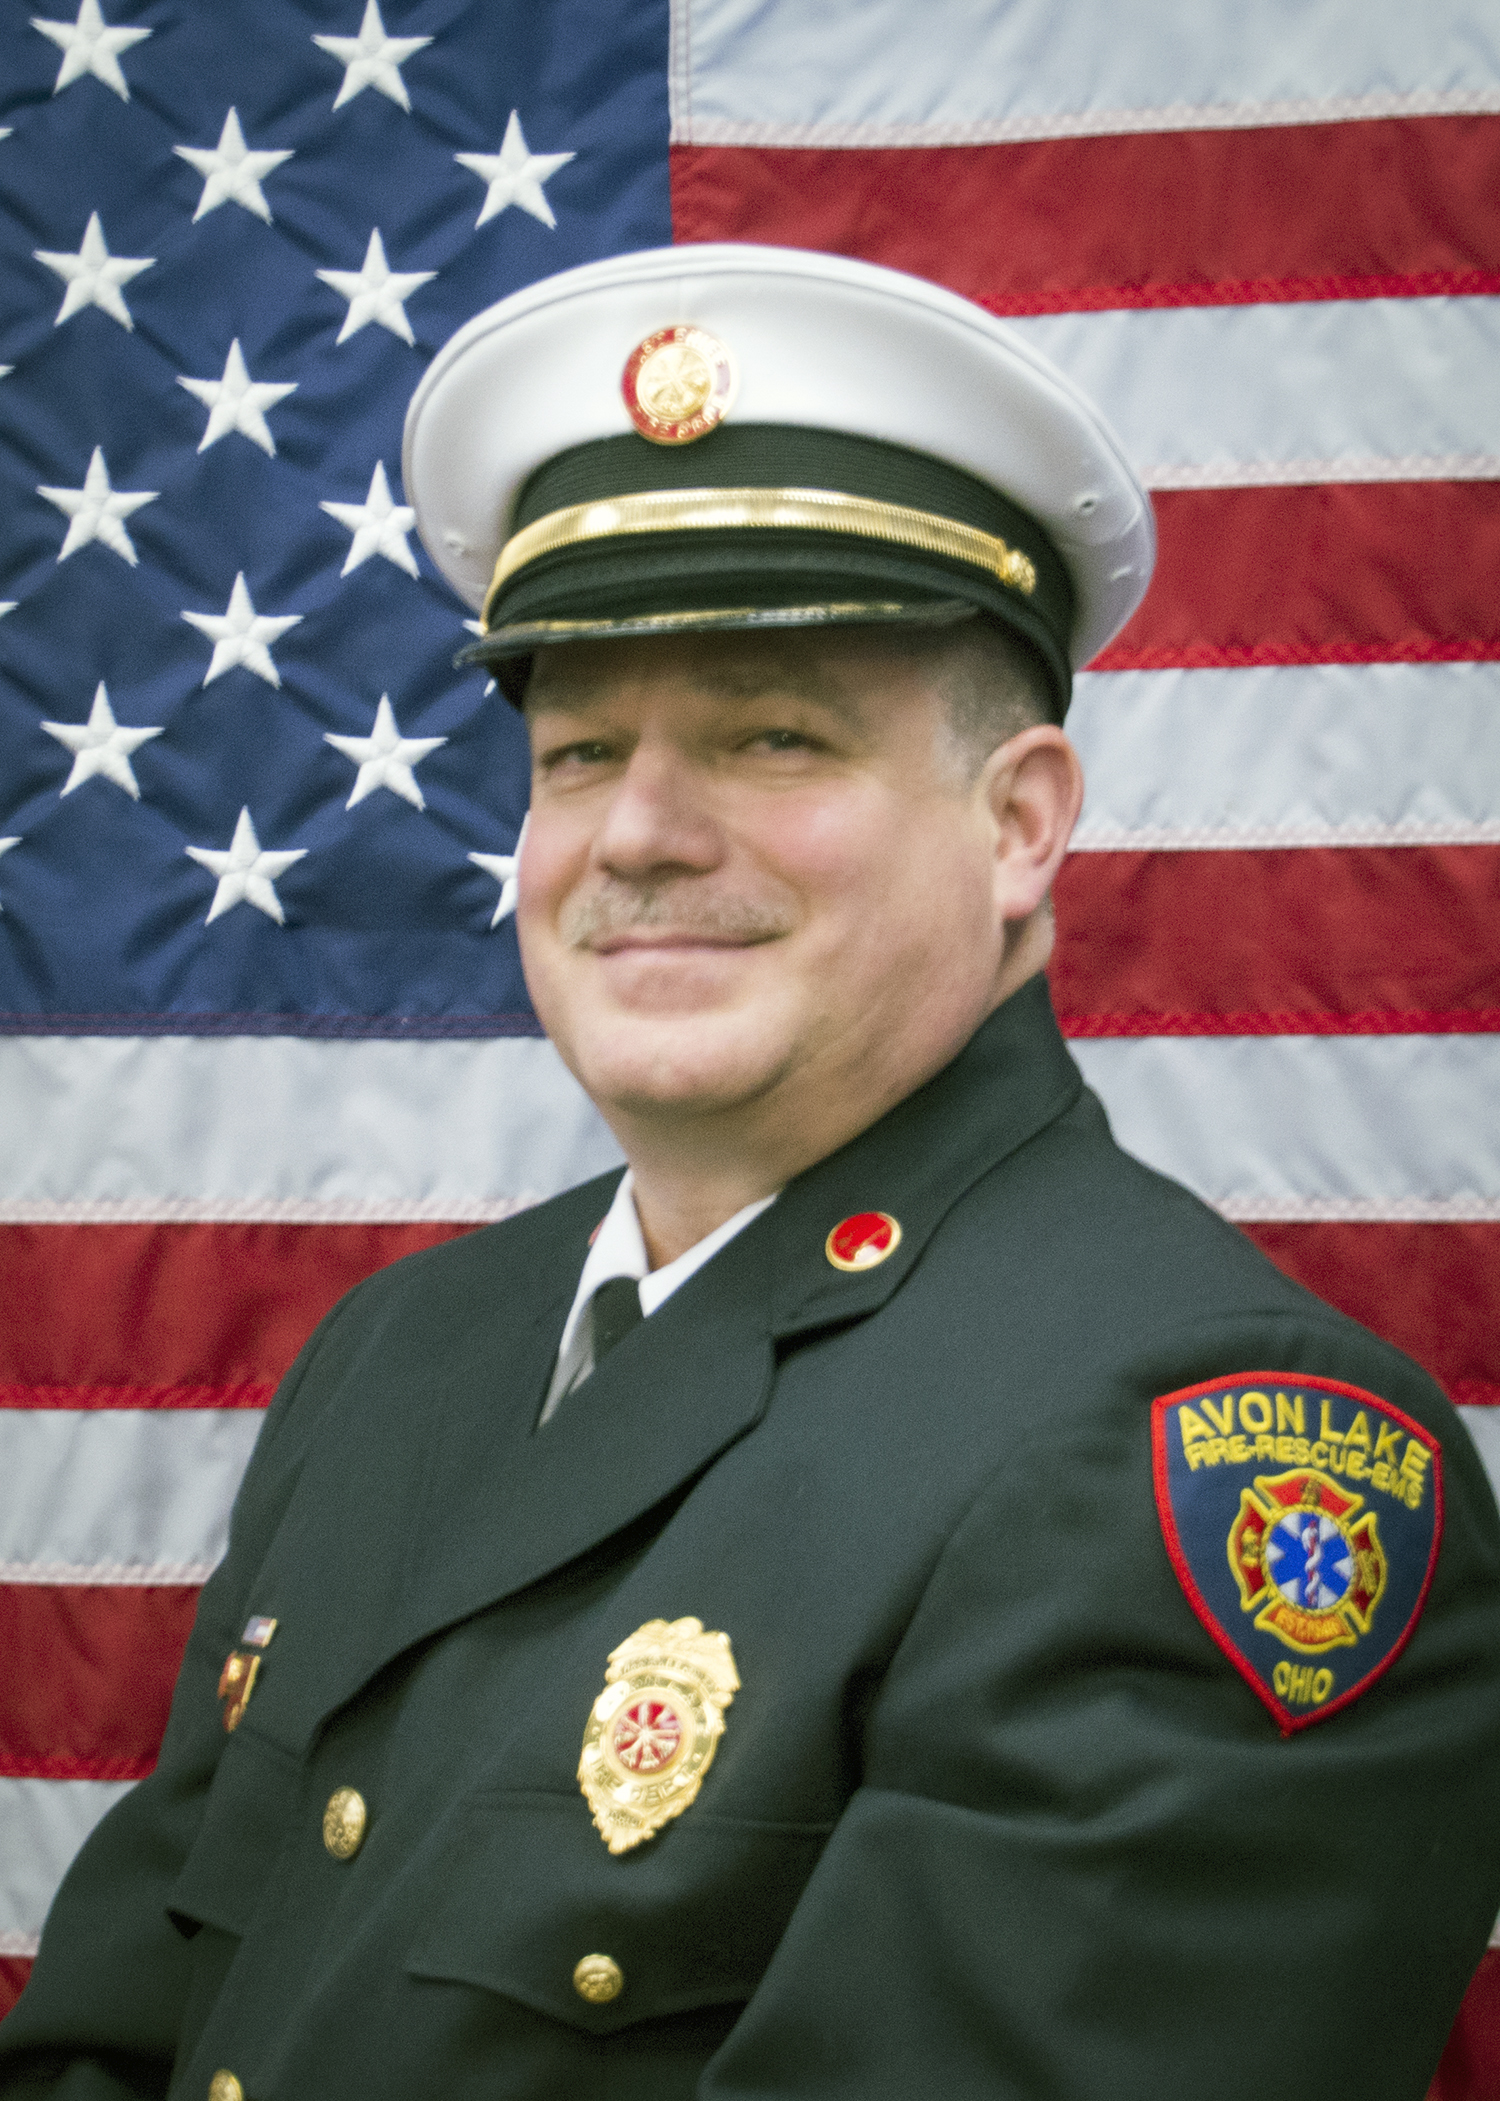 Assistant Chief Steve Peter